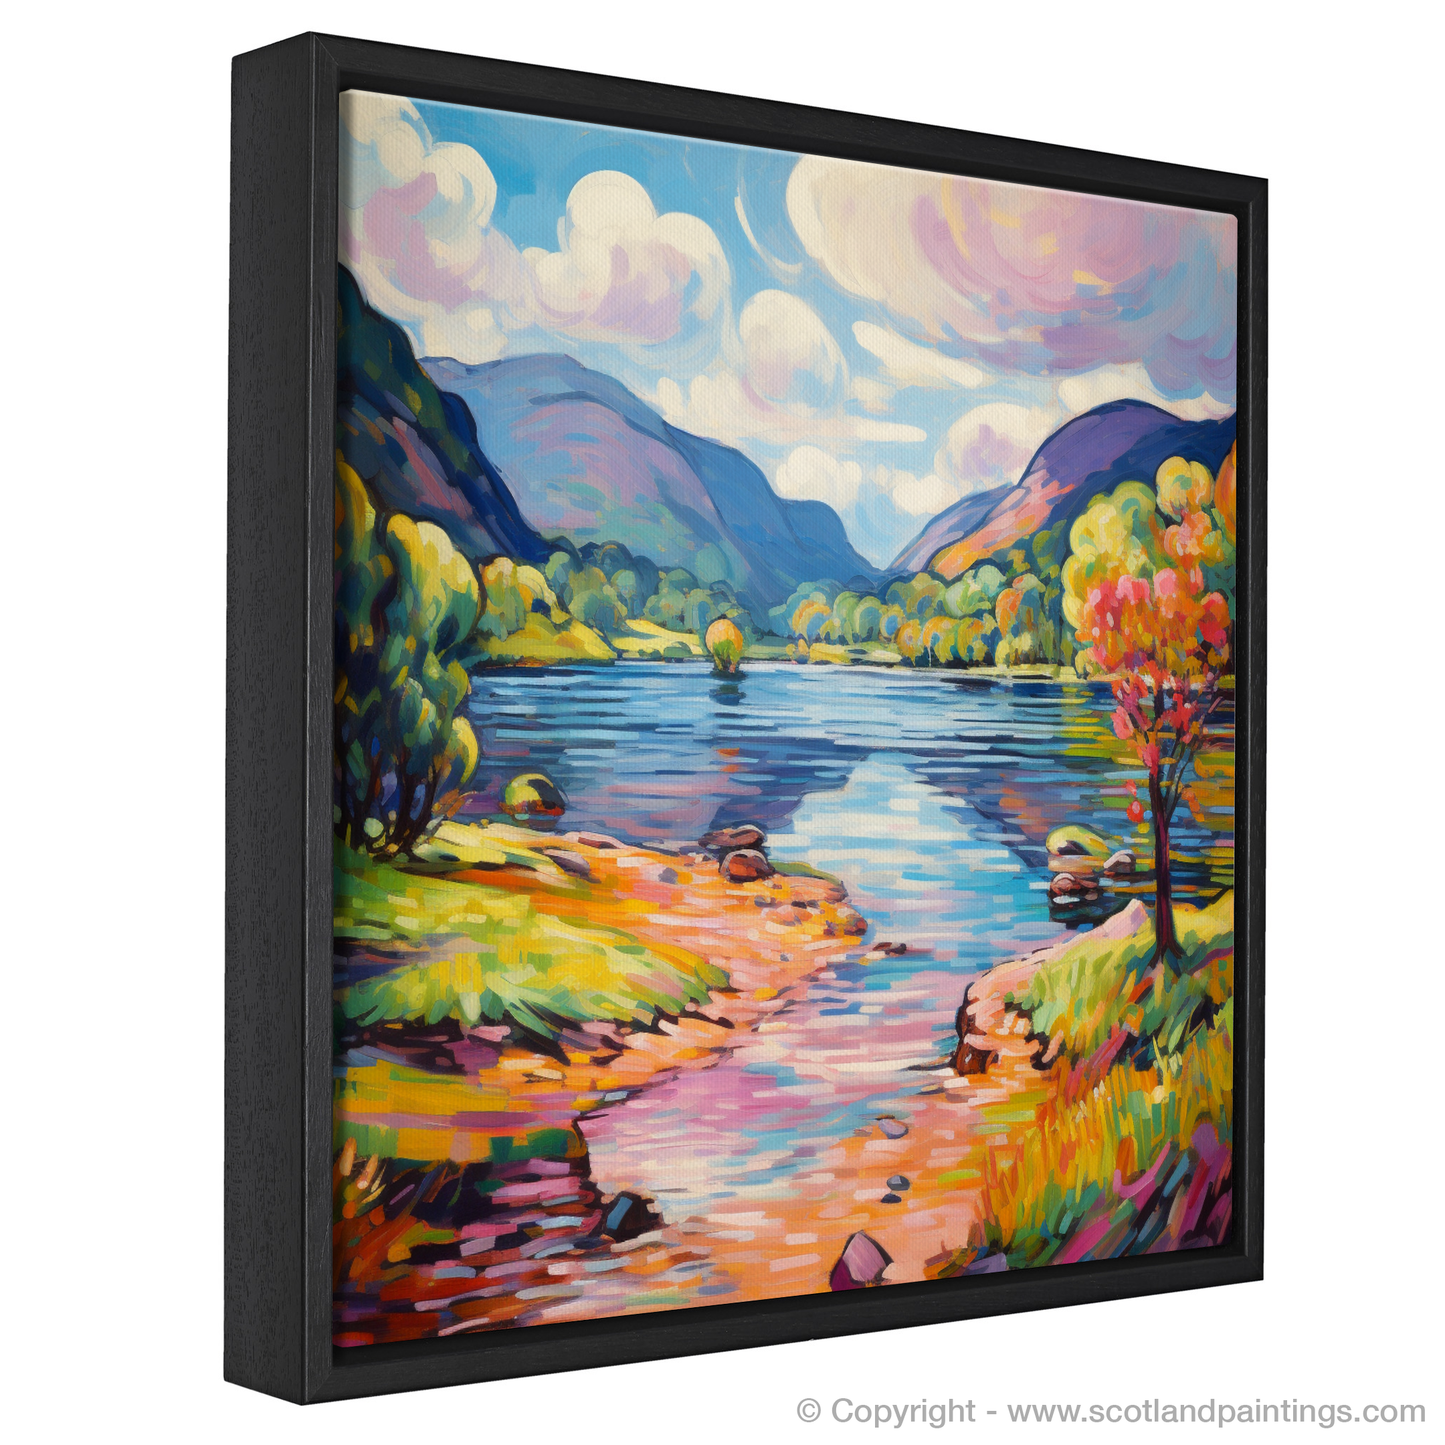 Painting and Art Print of Loch Voil in summer entitled "Summer Fervour at Loch Voil".